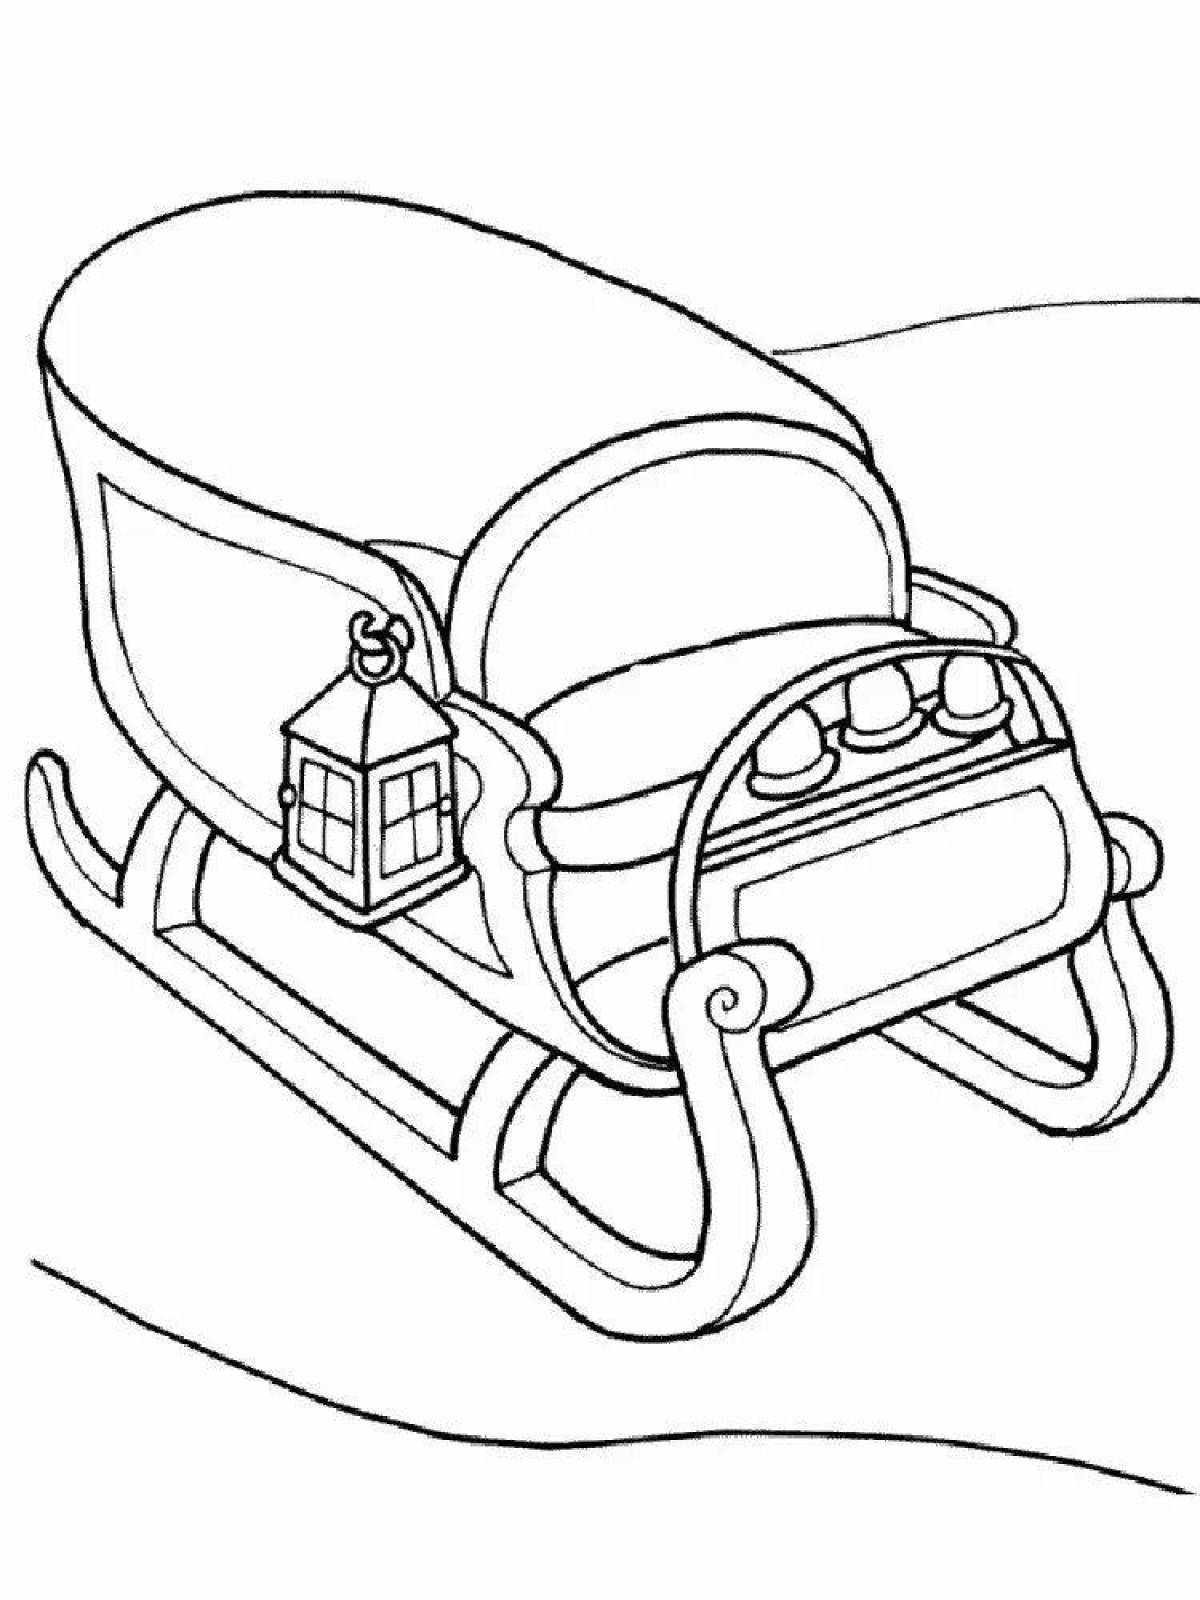 Coloring page jubilant sleigh for babies 2-3 years old